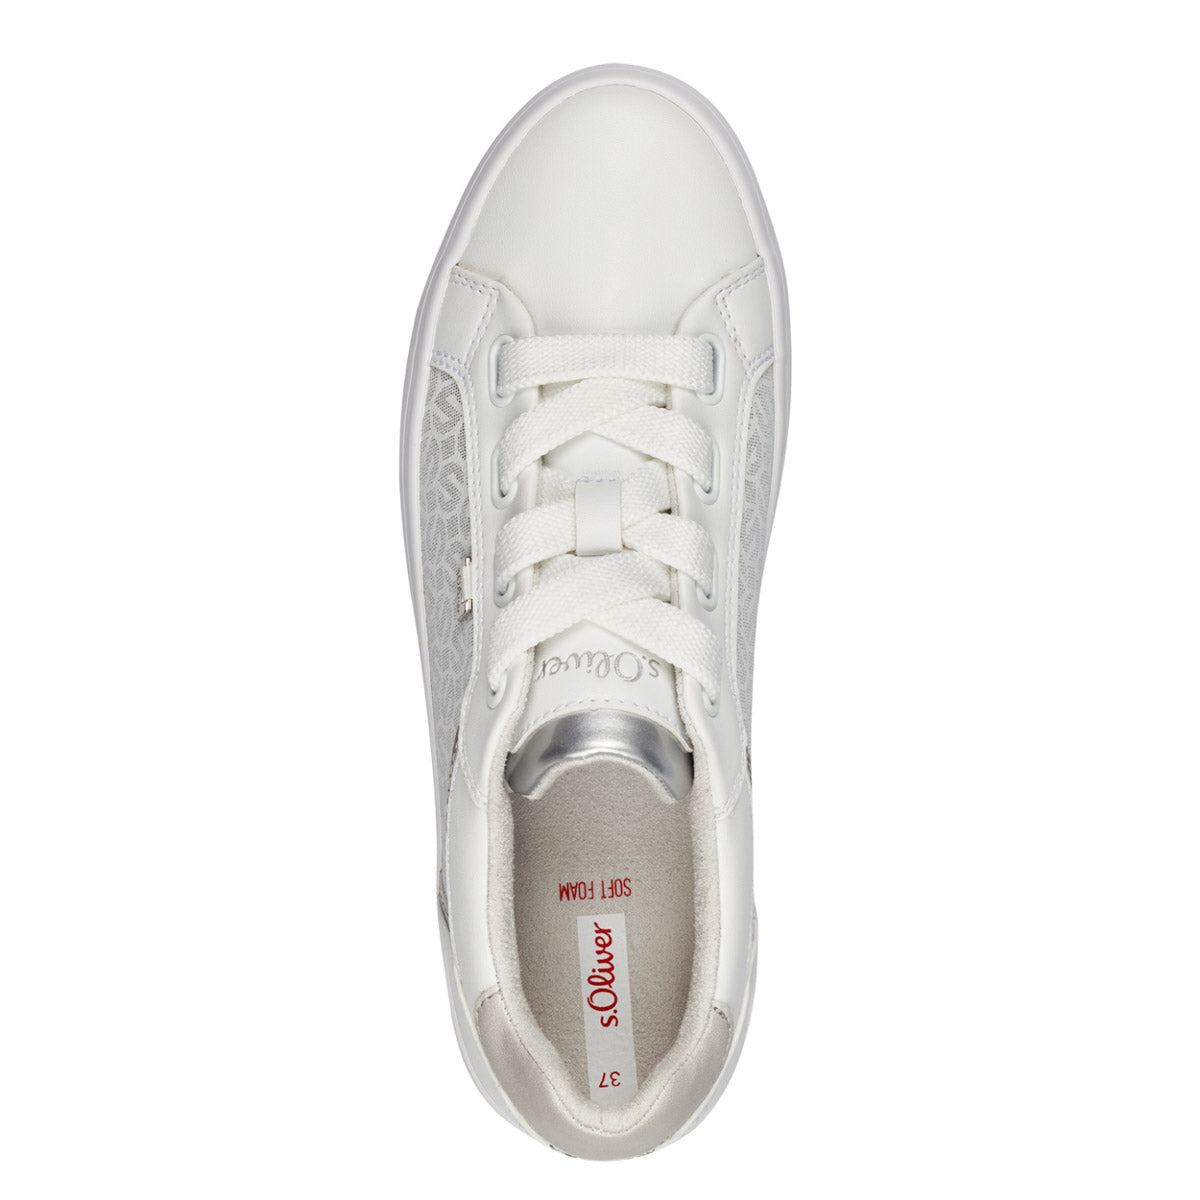 Top view of S.Oliver Silver Detailed Runner Shoes, focusing on the four-eye lace-up design.